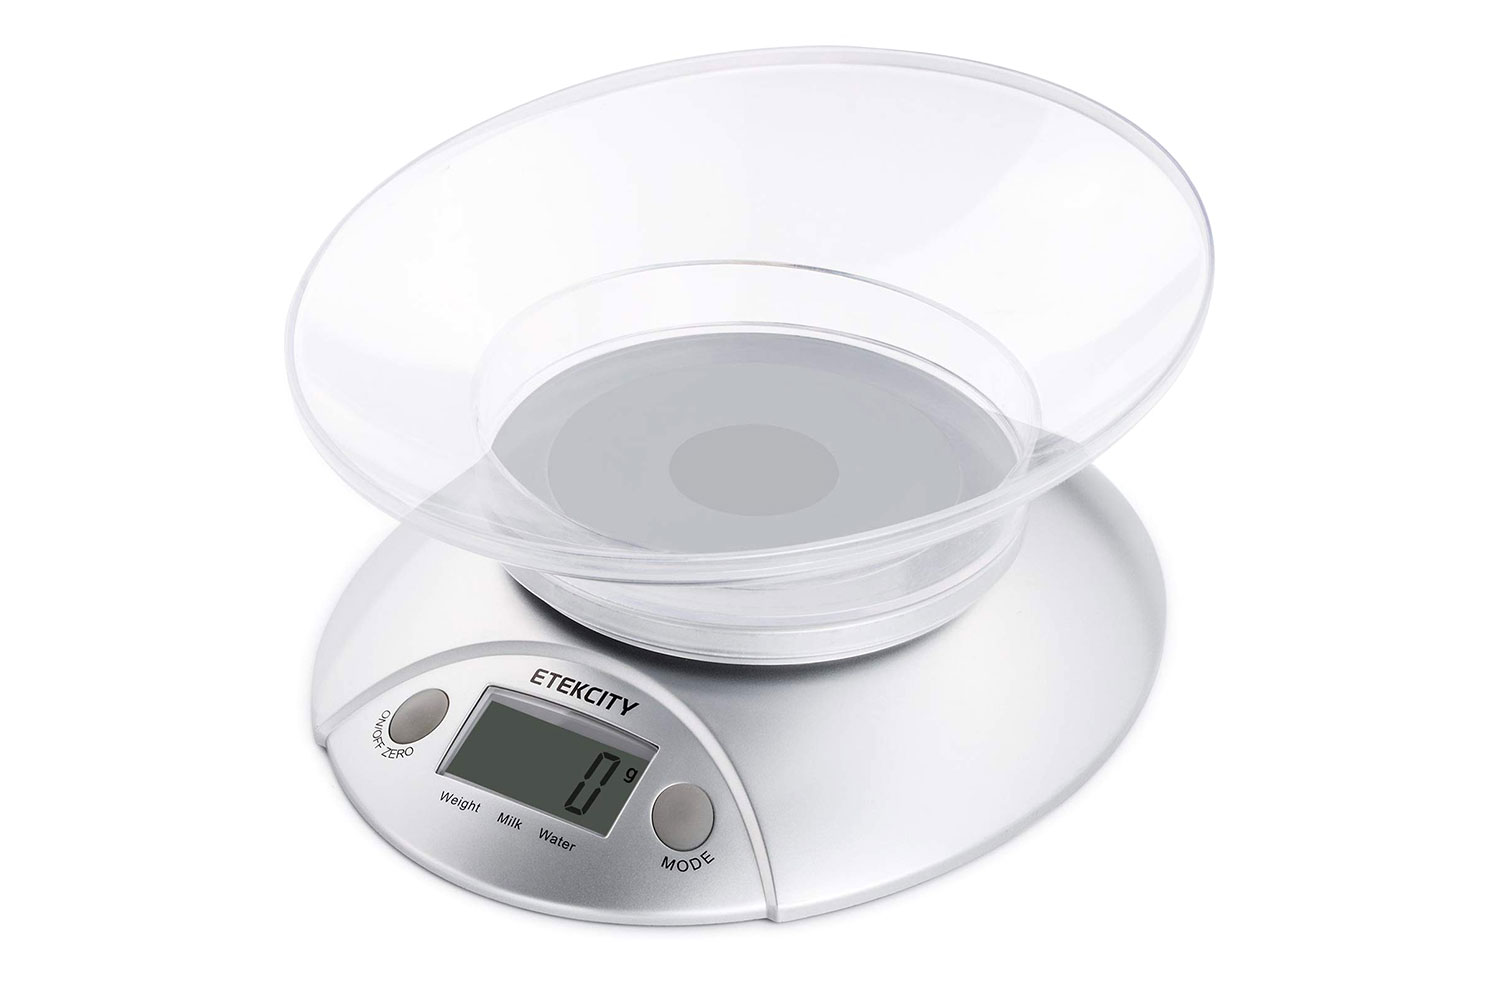 7 Best Digital Food Scales to Smarten Up Your Kitchen and Meal Prep in 2022  - The Manual